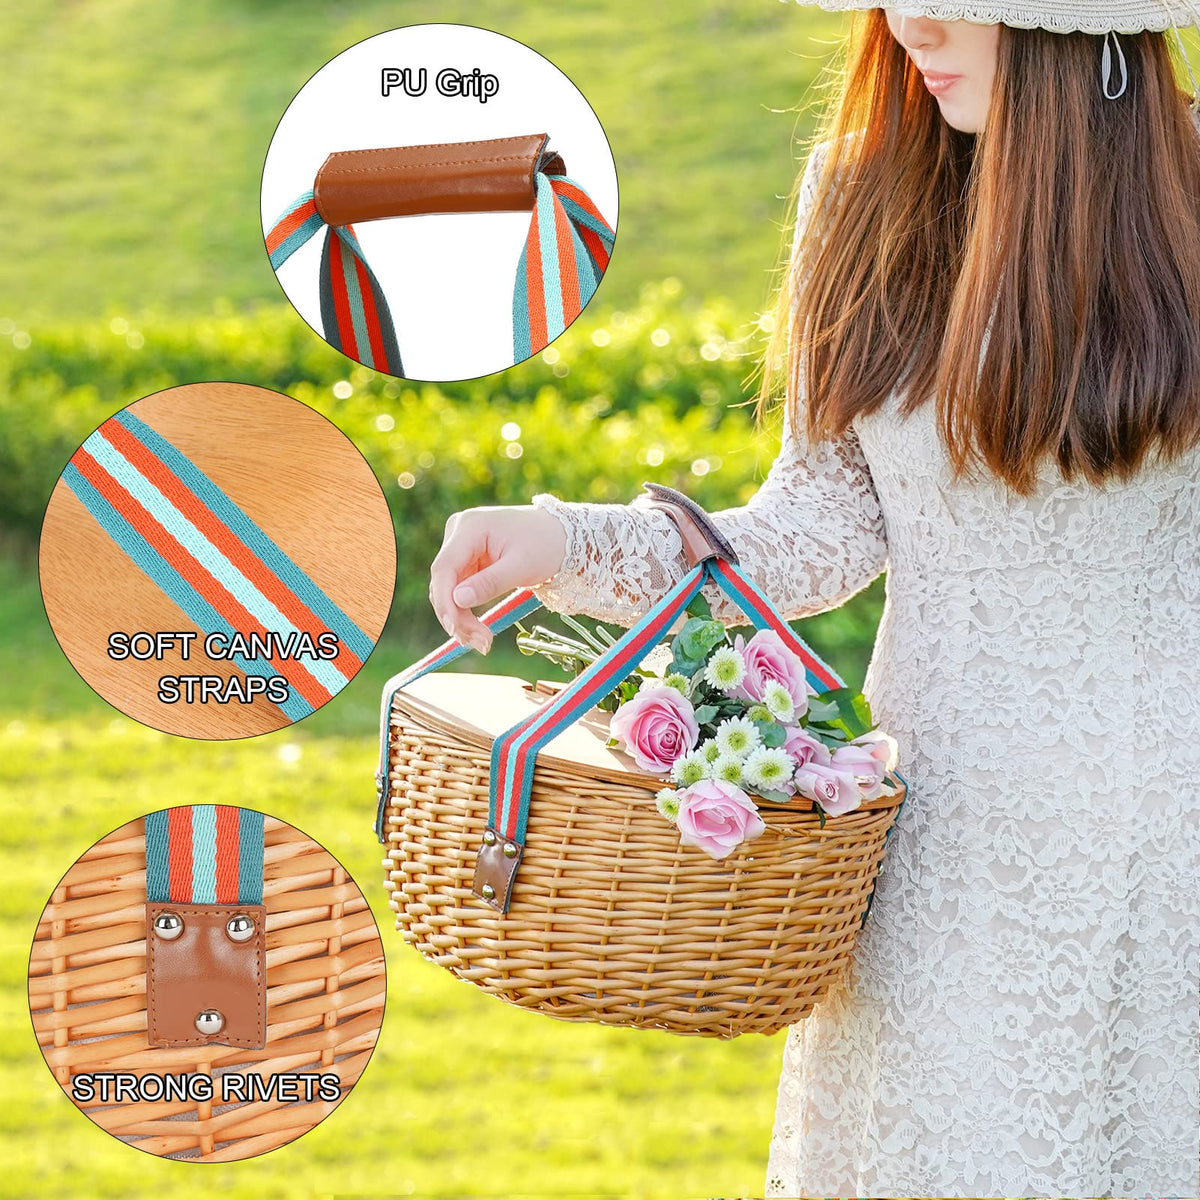 Picnic Basket Set with Foldable Table for 4-Blue